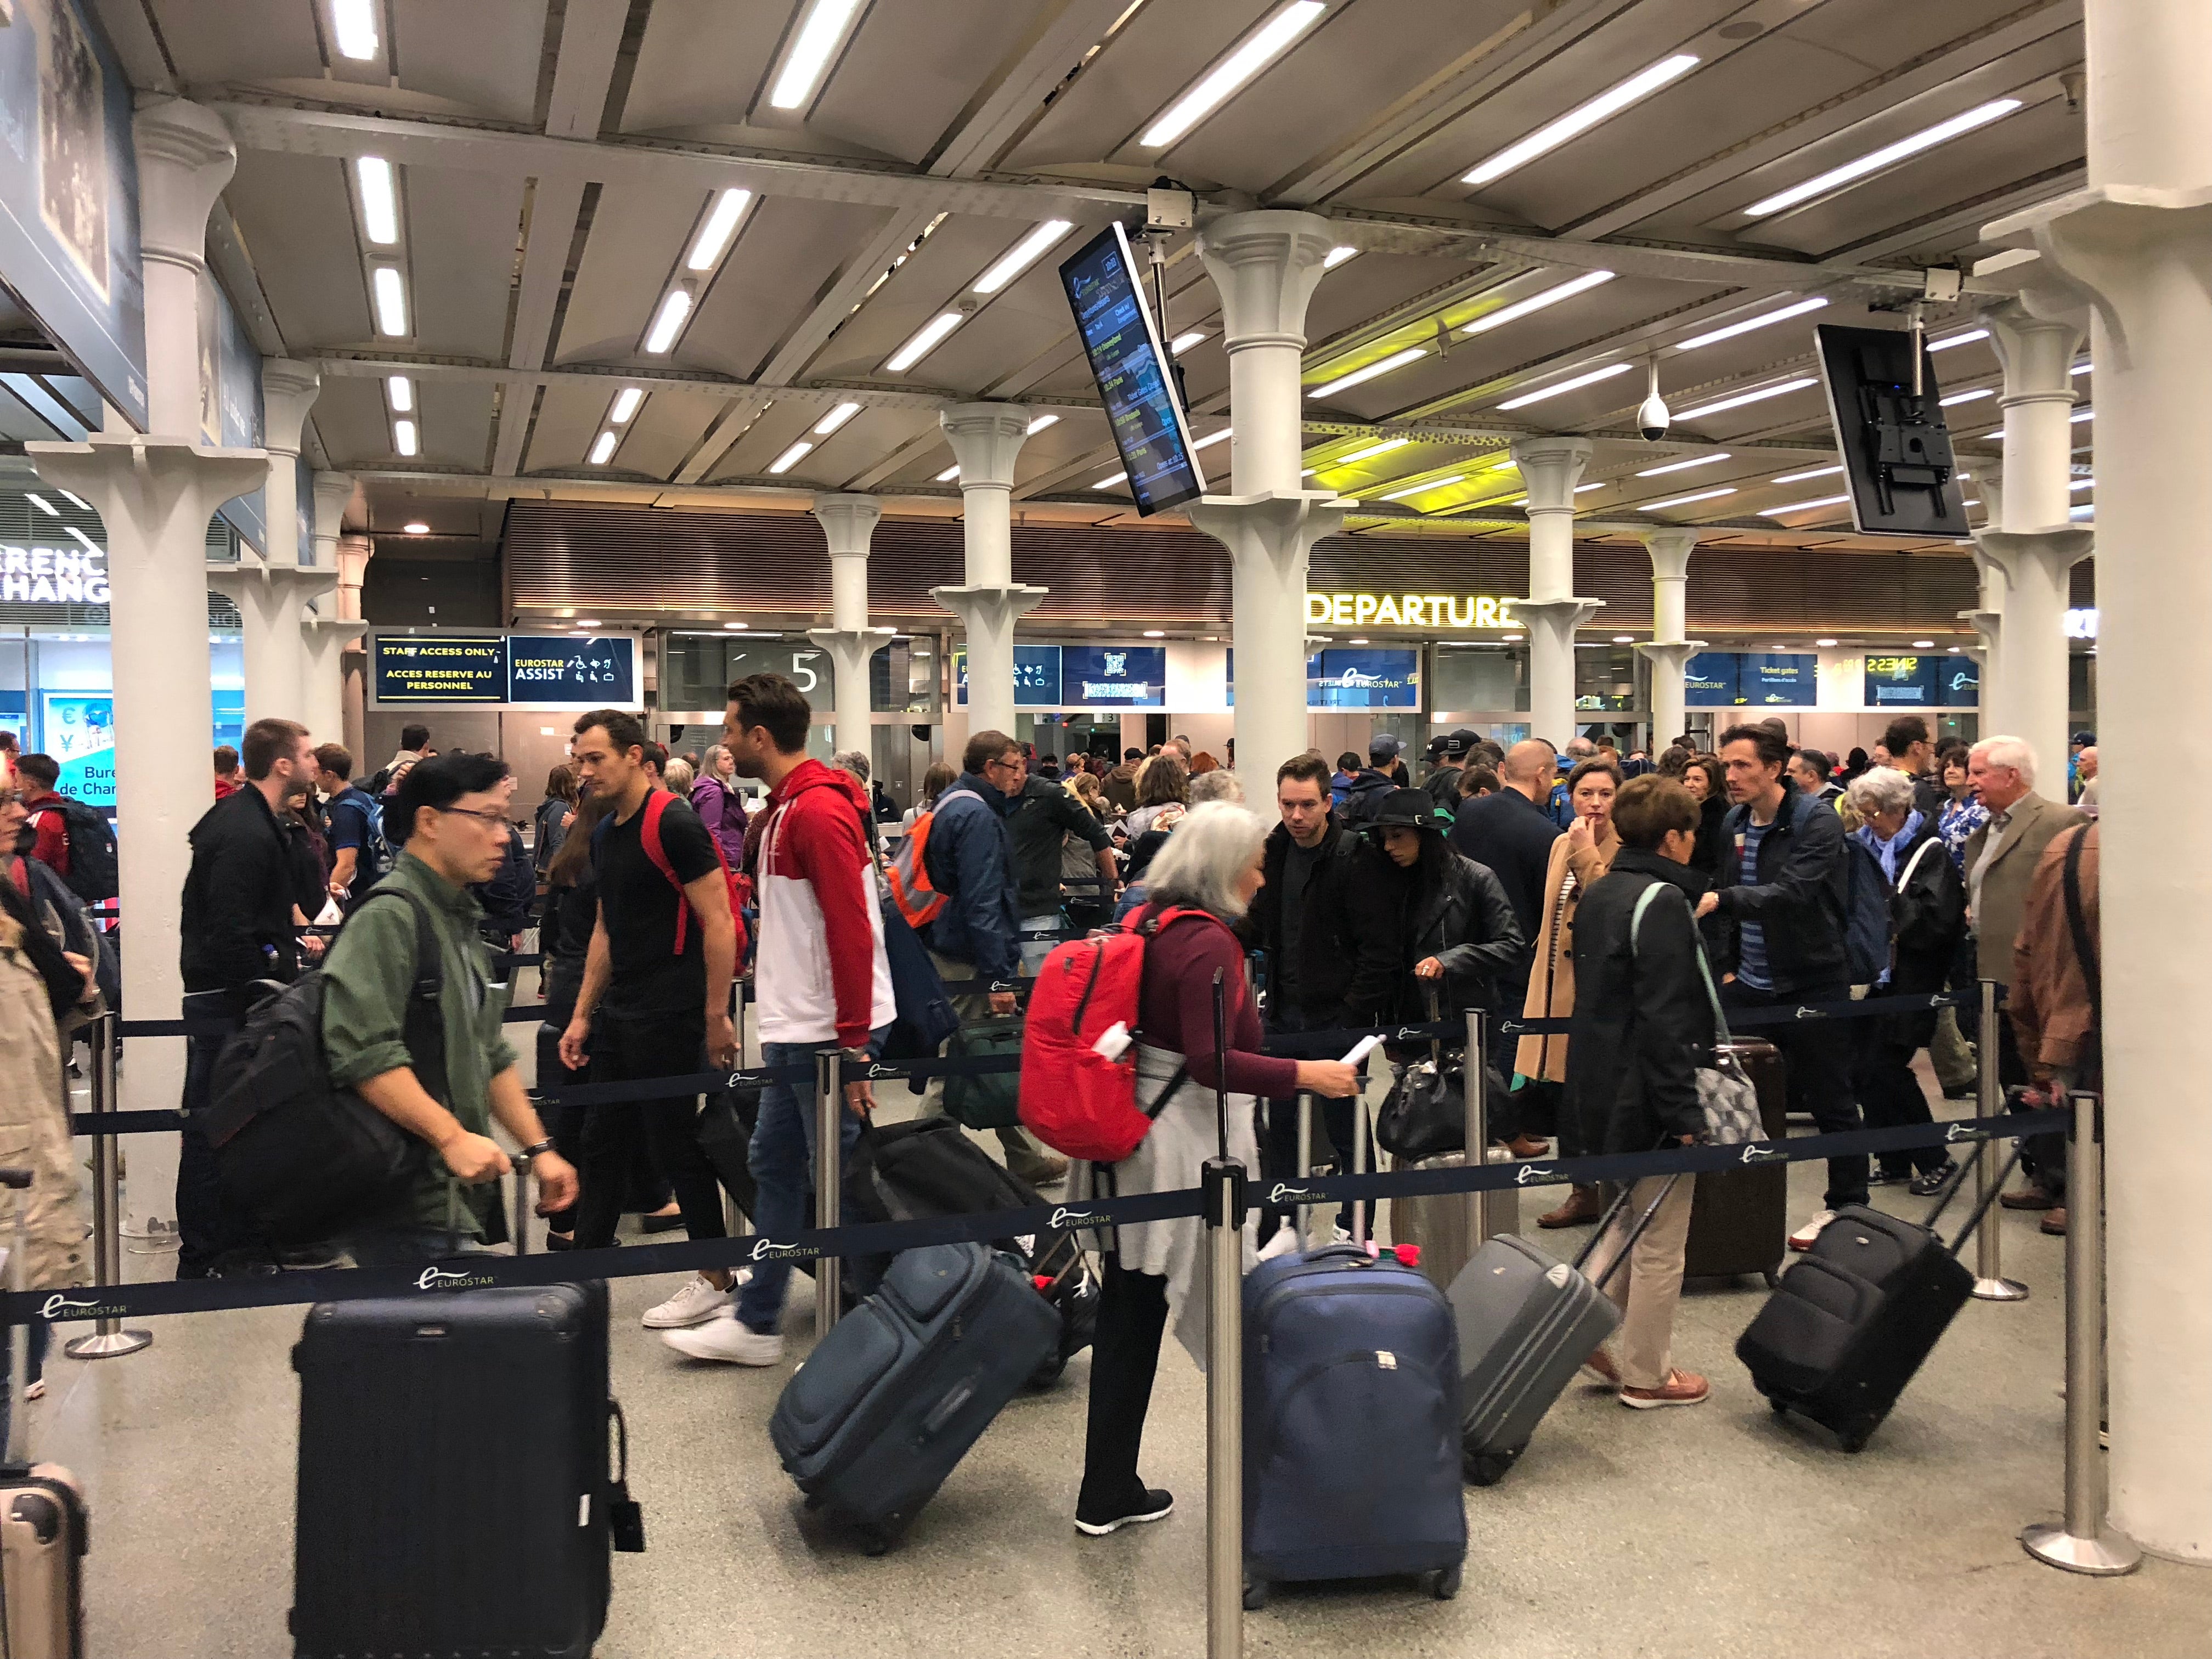 Space invaders: check-in queue for Eurostar trains at London St Pancras International before the coronavirus pandemic